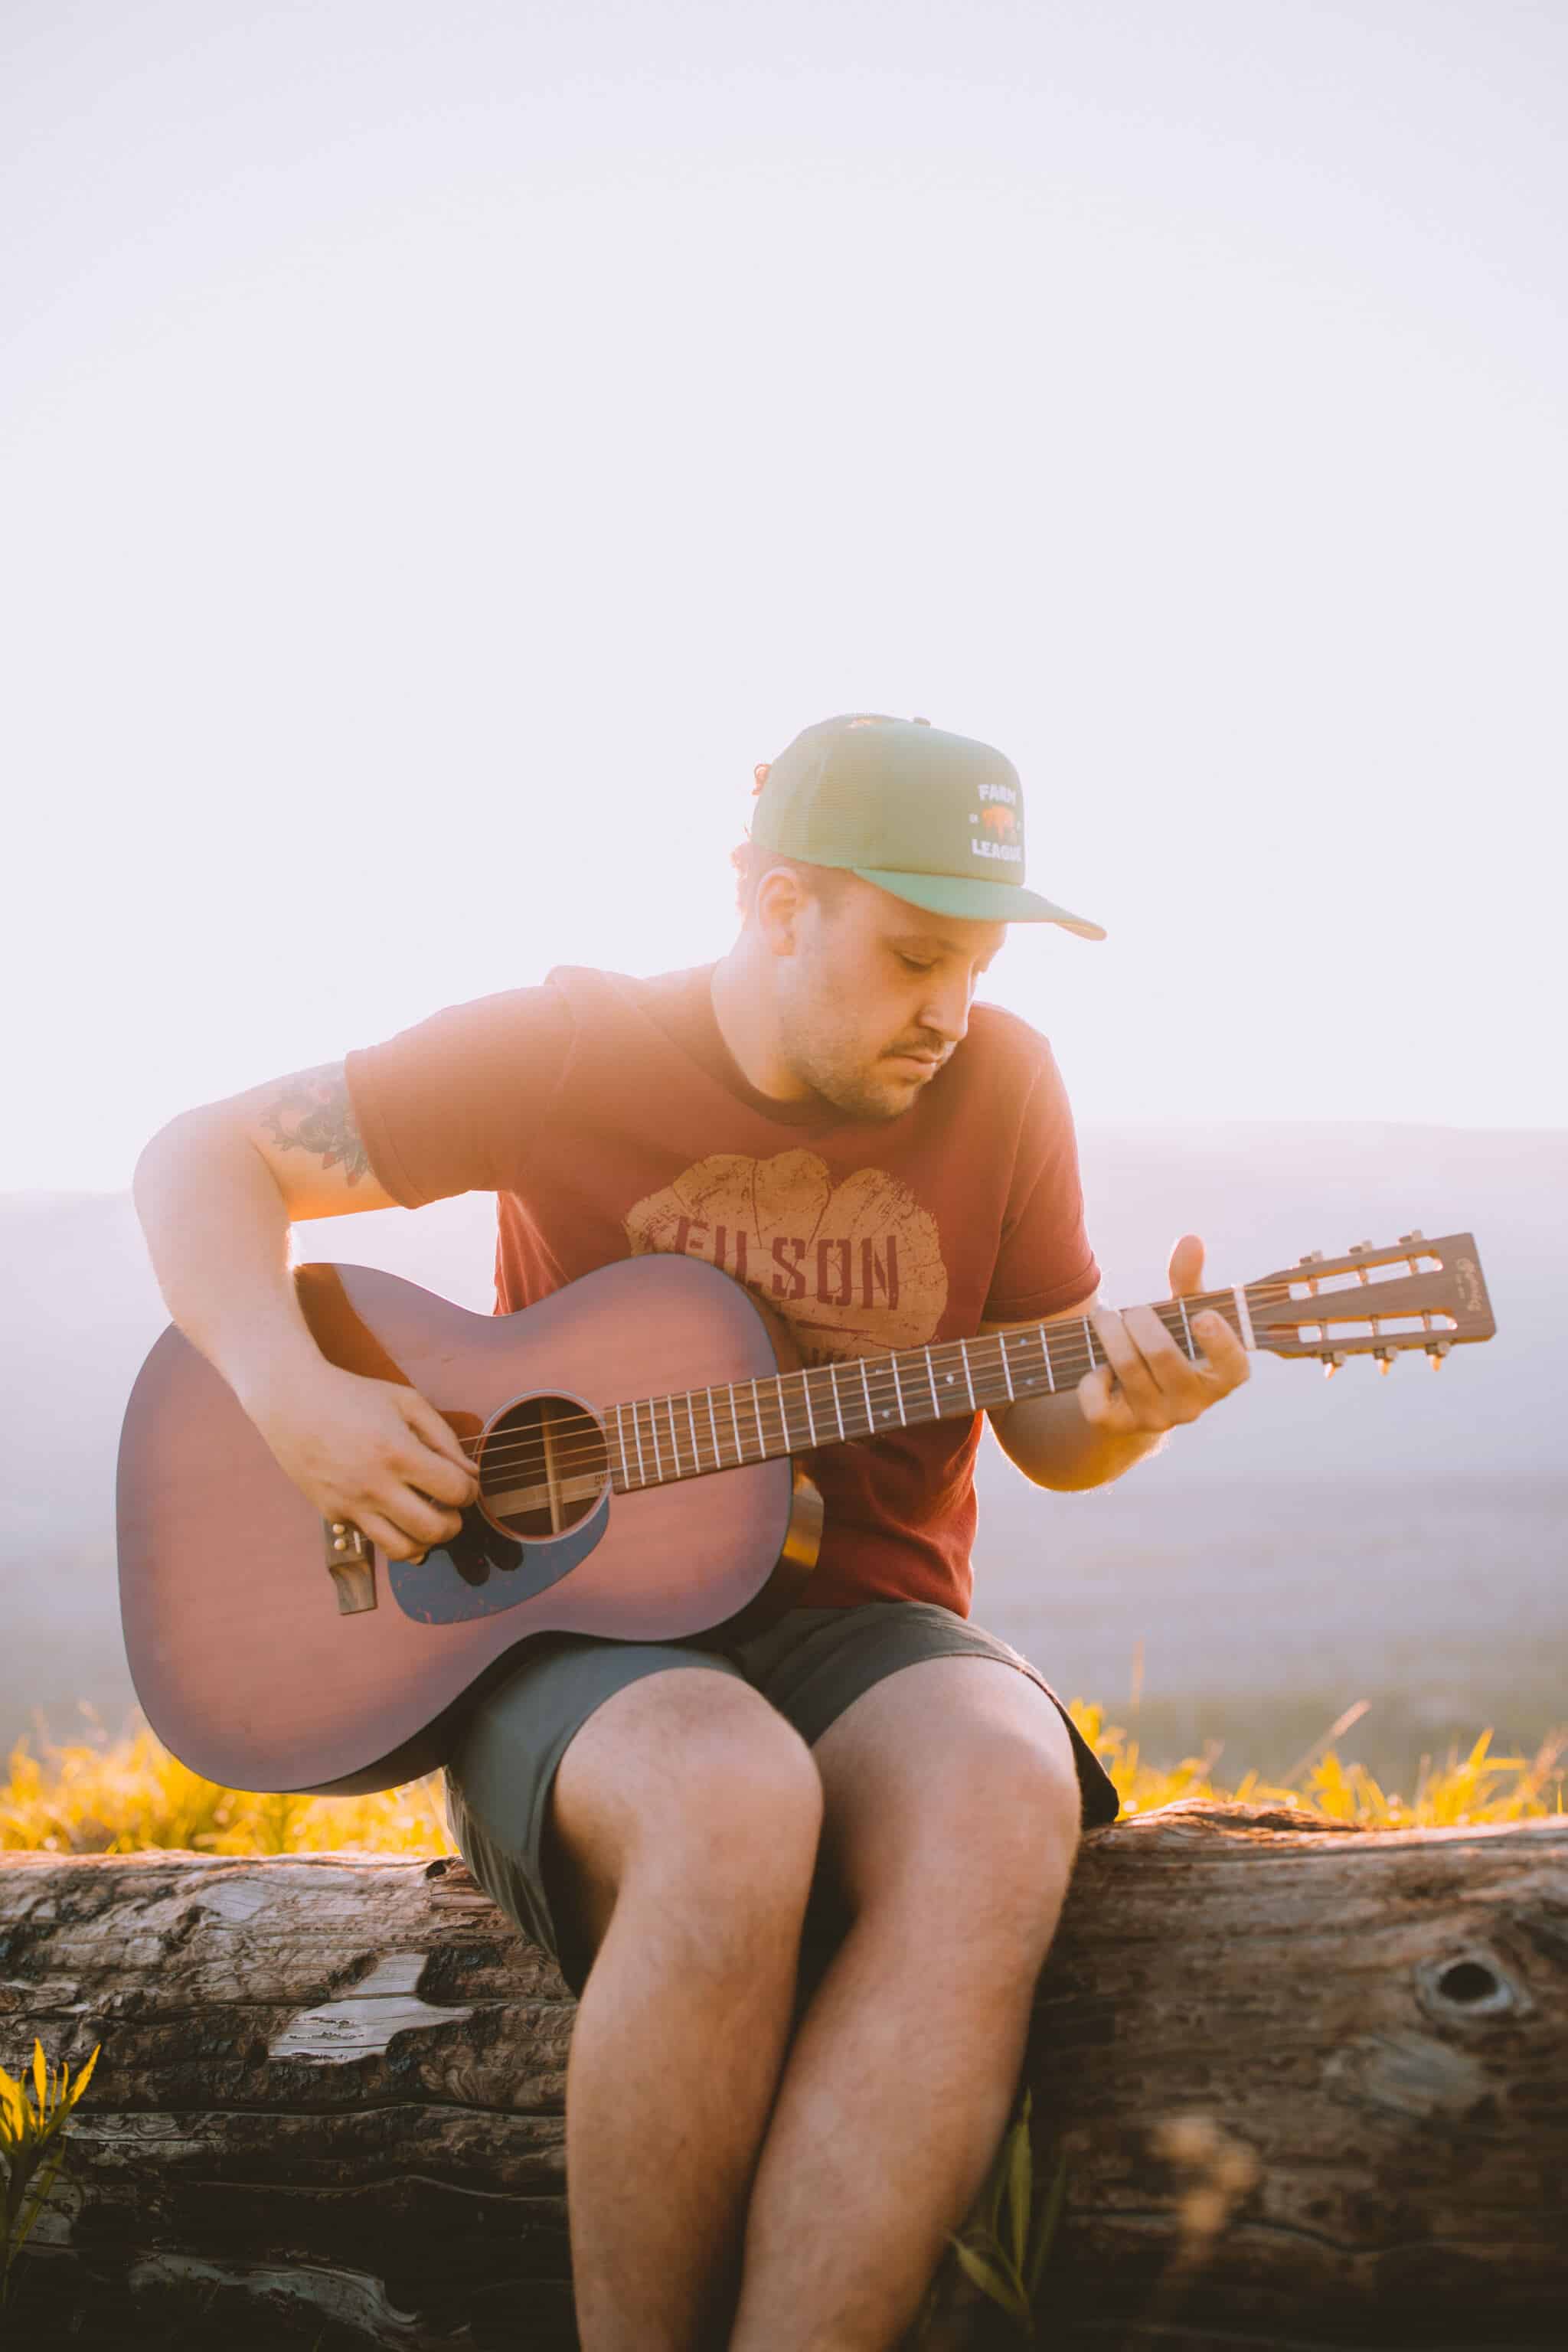 Forrest Playing Guitar - Travel Photography Tips